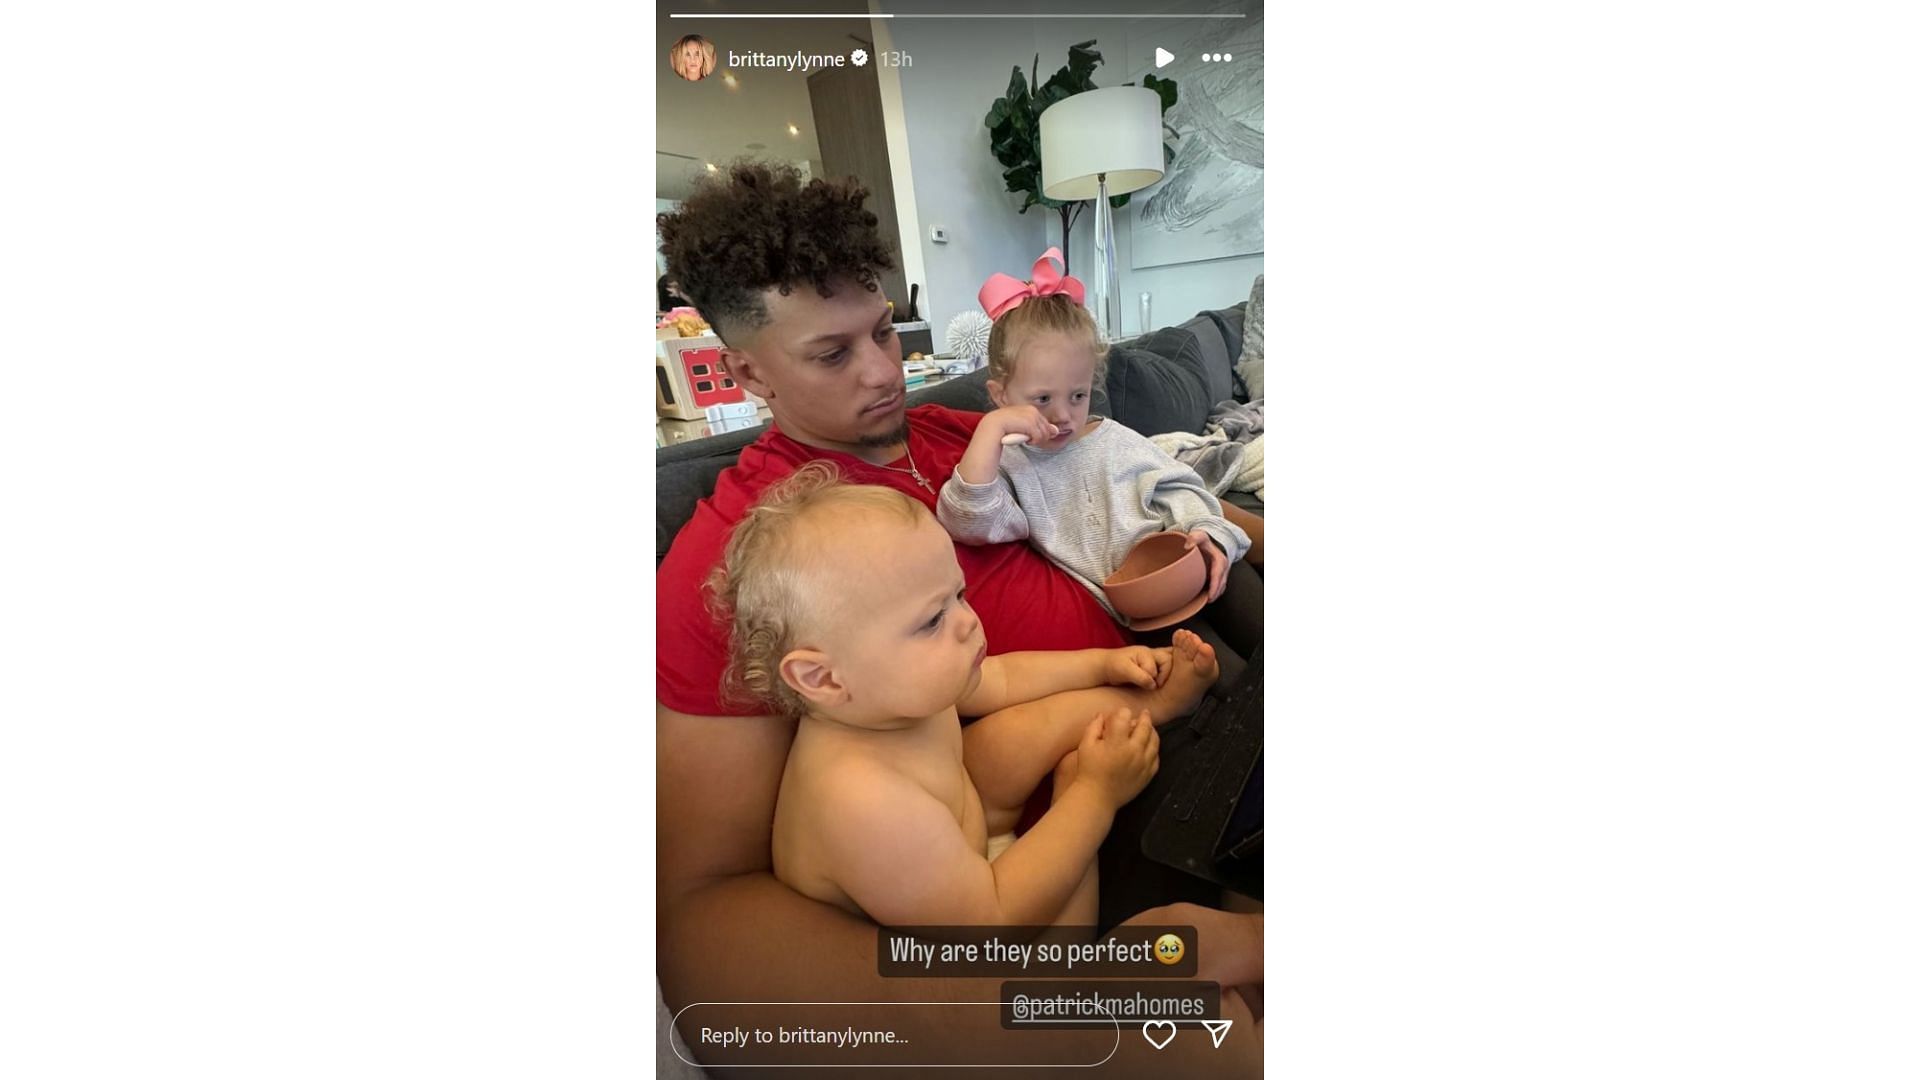 Brittany Mahomes shares Patrick Mahomes&#039; image with kids Sterling and Bronze (Image credit: @brittanylynne IG)